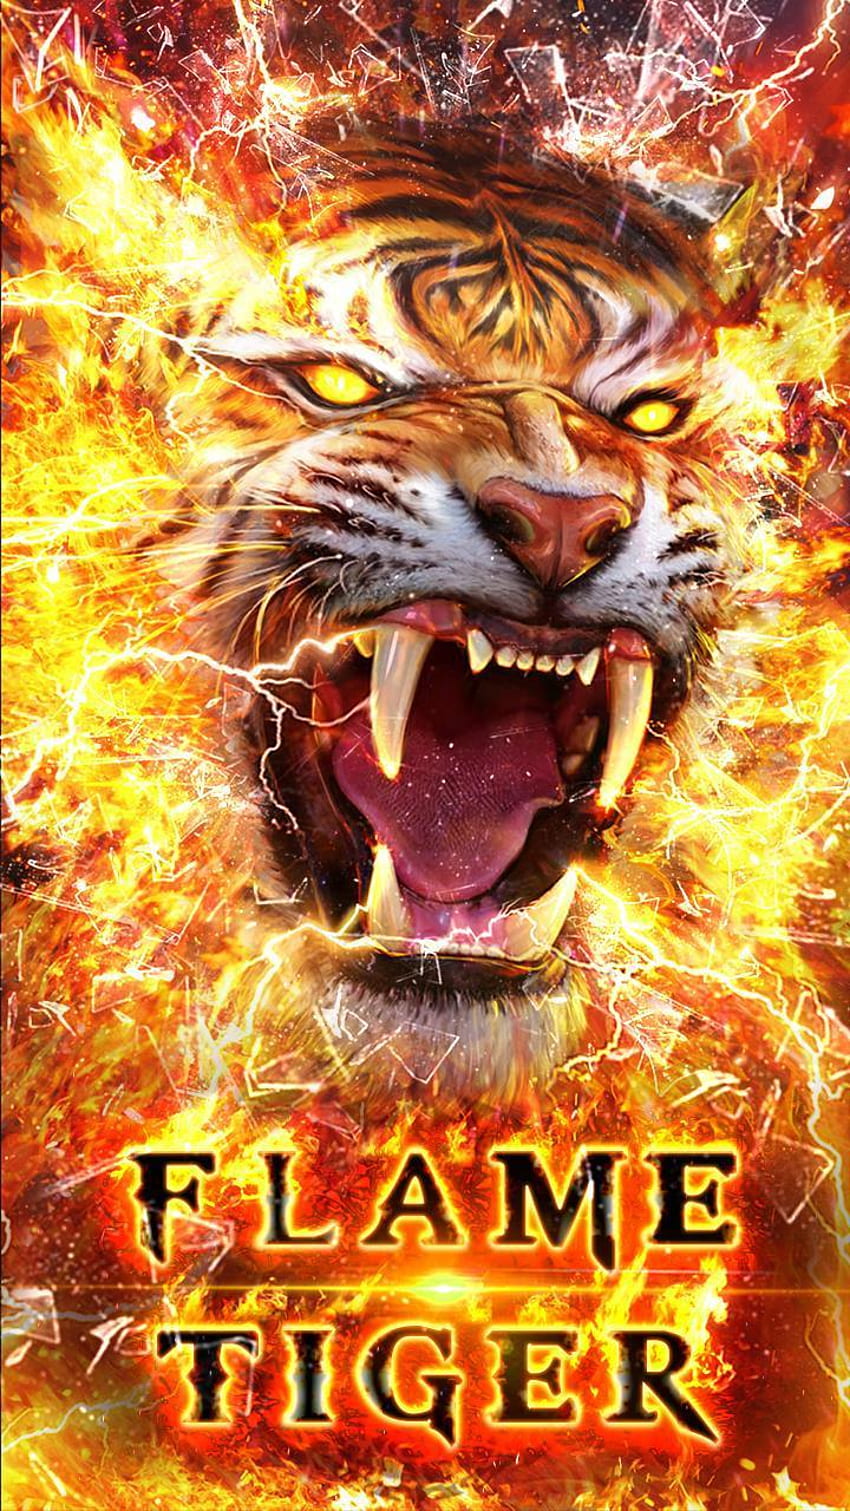 Horrible Fire Tiger Live for Android, Flaming Tiger HD phone wallpaper